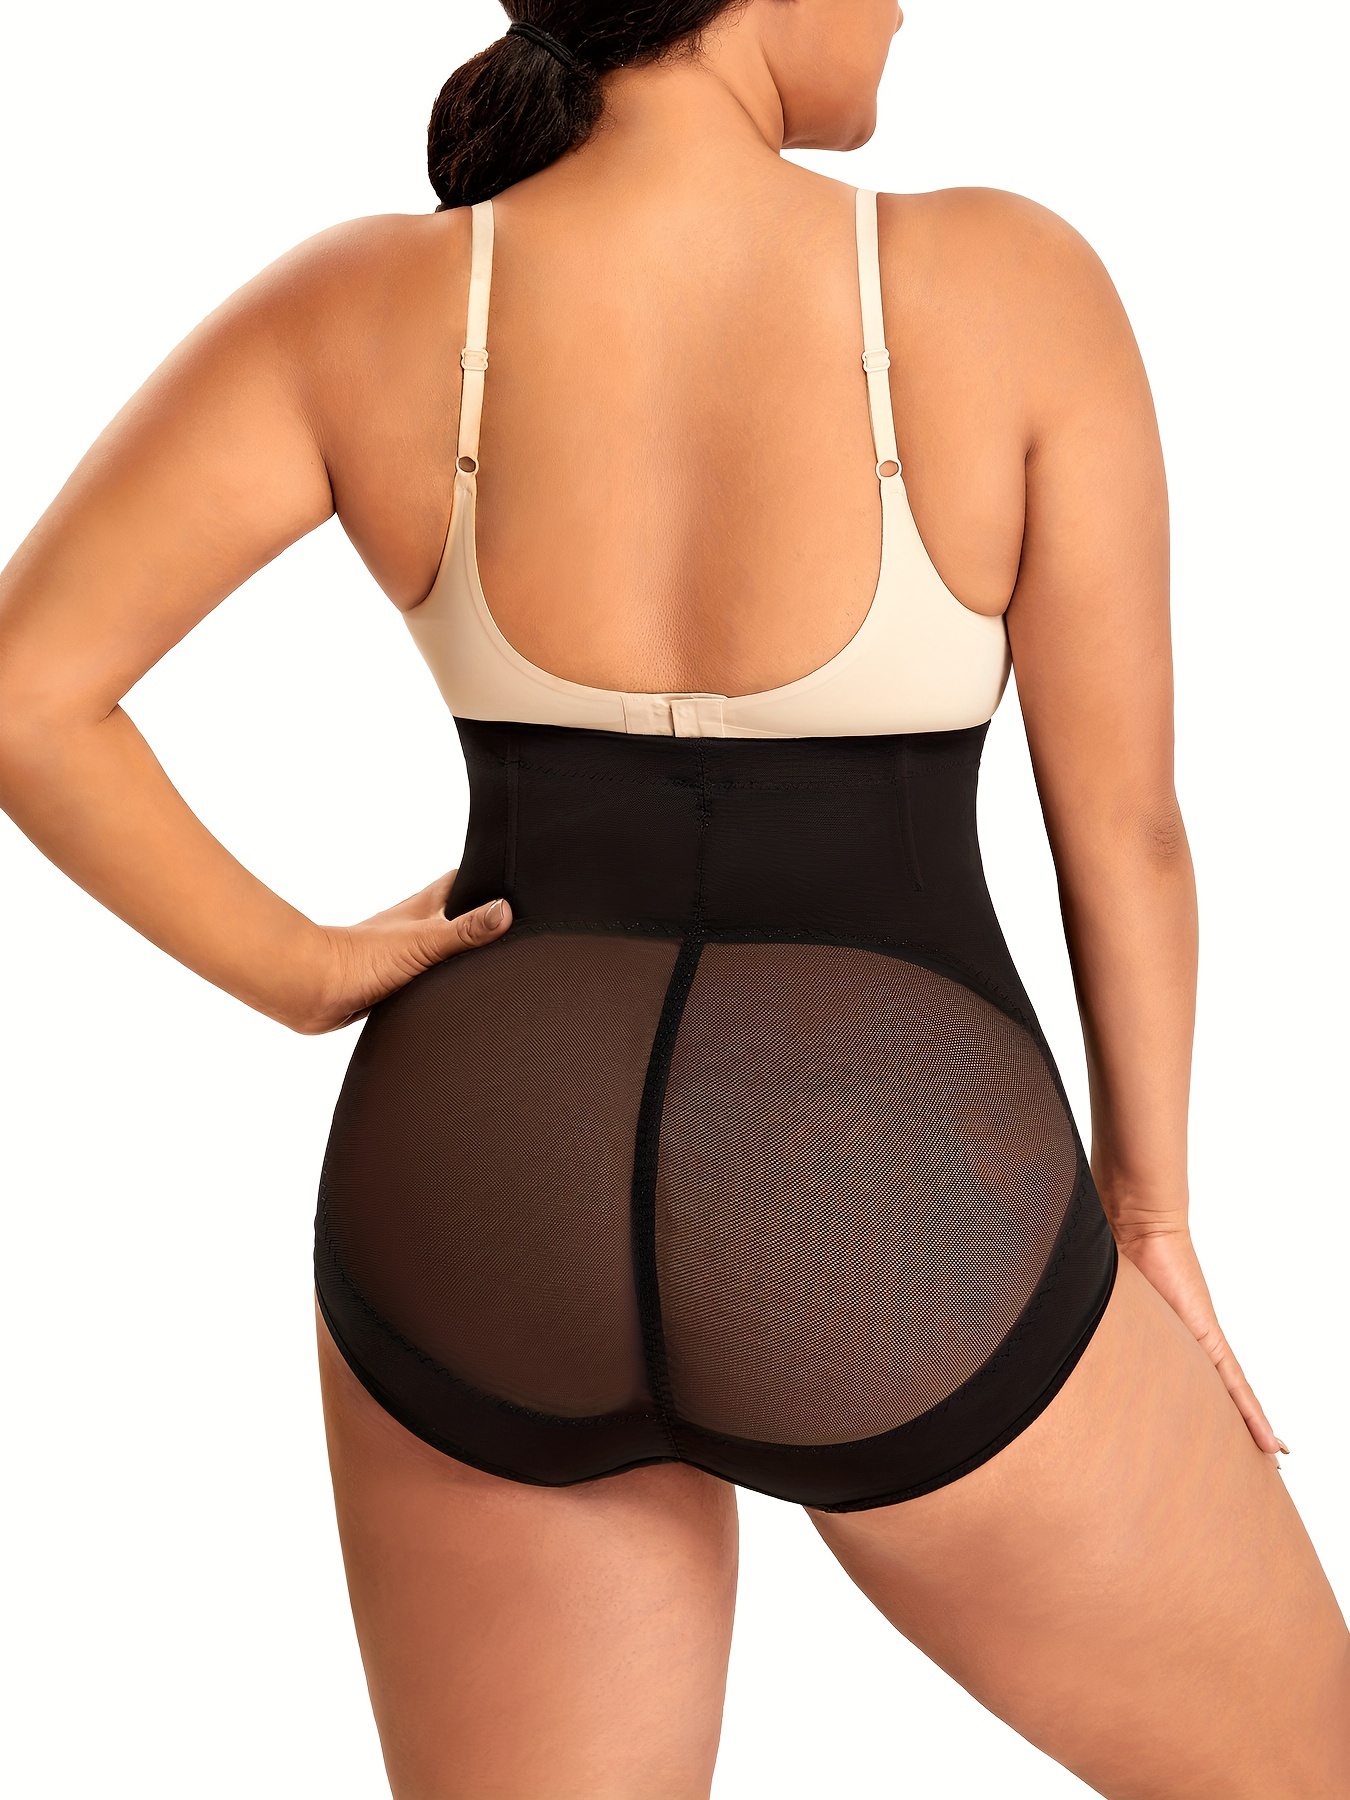 Heavenly Shapewear Women's Jacquard Padded Panty ** Click image for more  details.